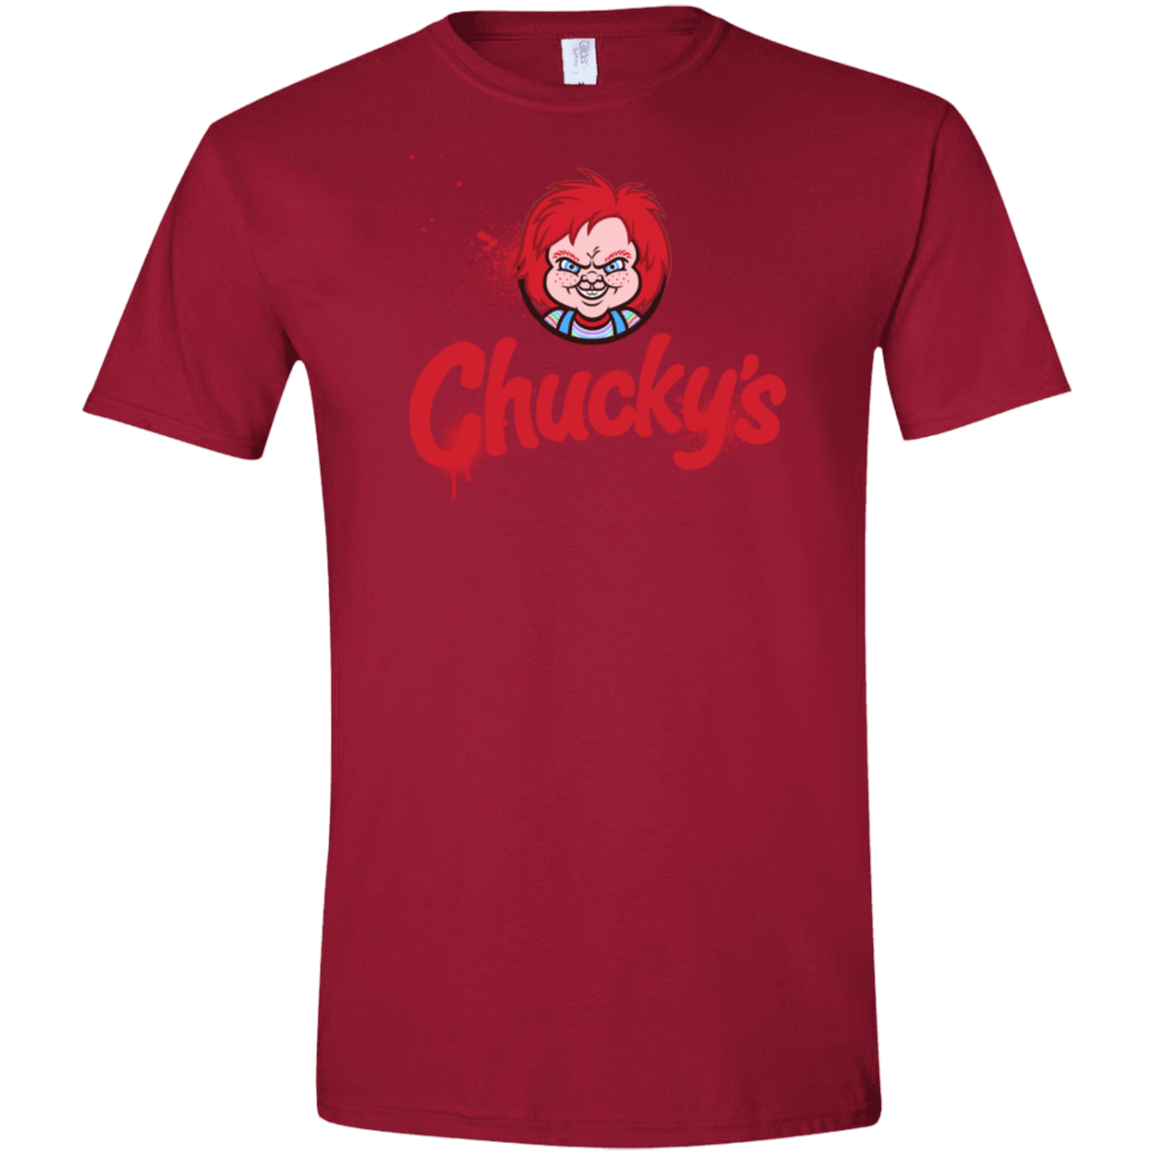 T-Shirts Cardinal Red / S Chuckys Logo Men's Semi-Fitted Softstyle